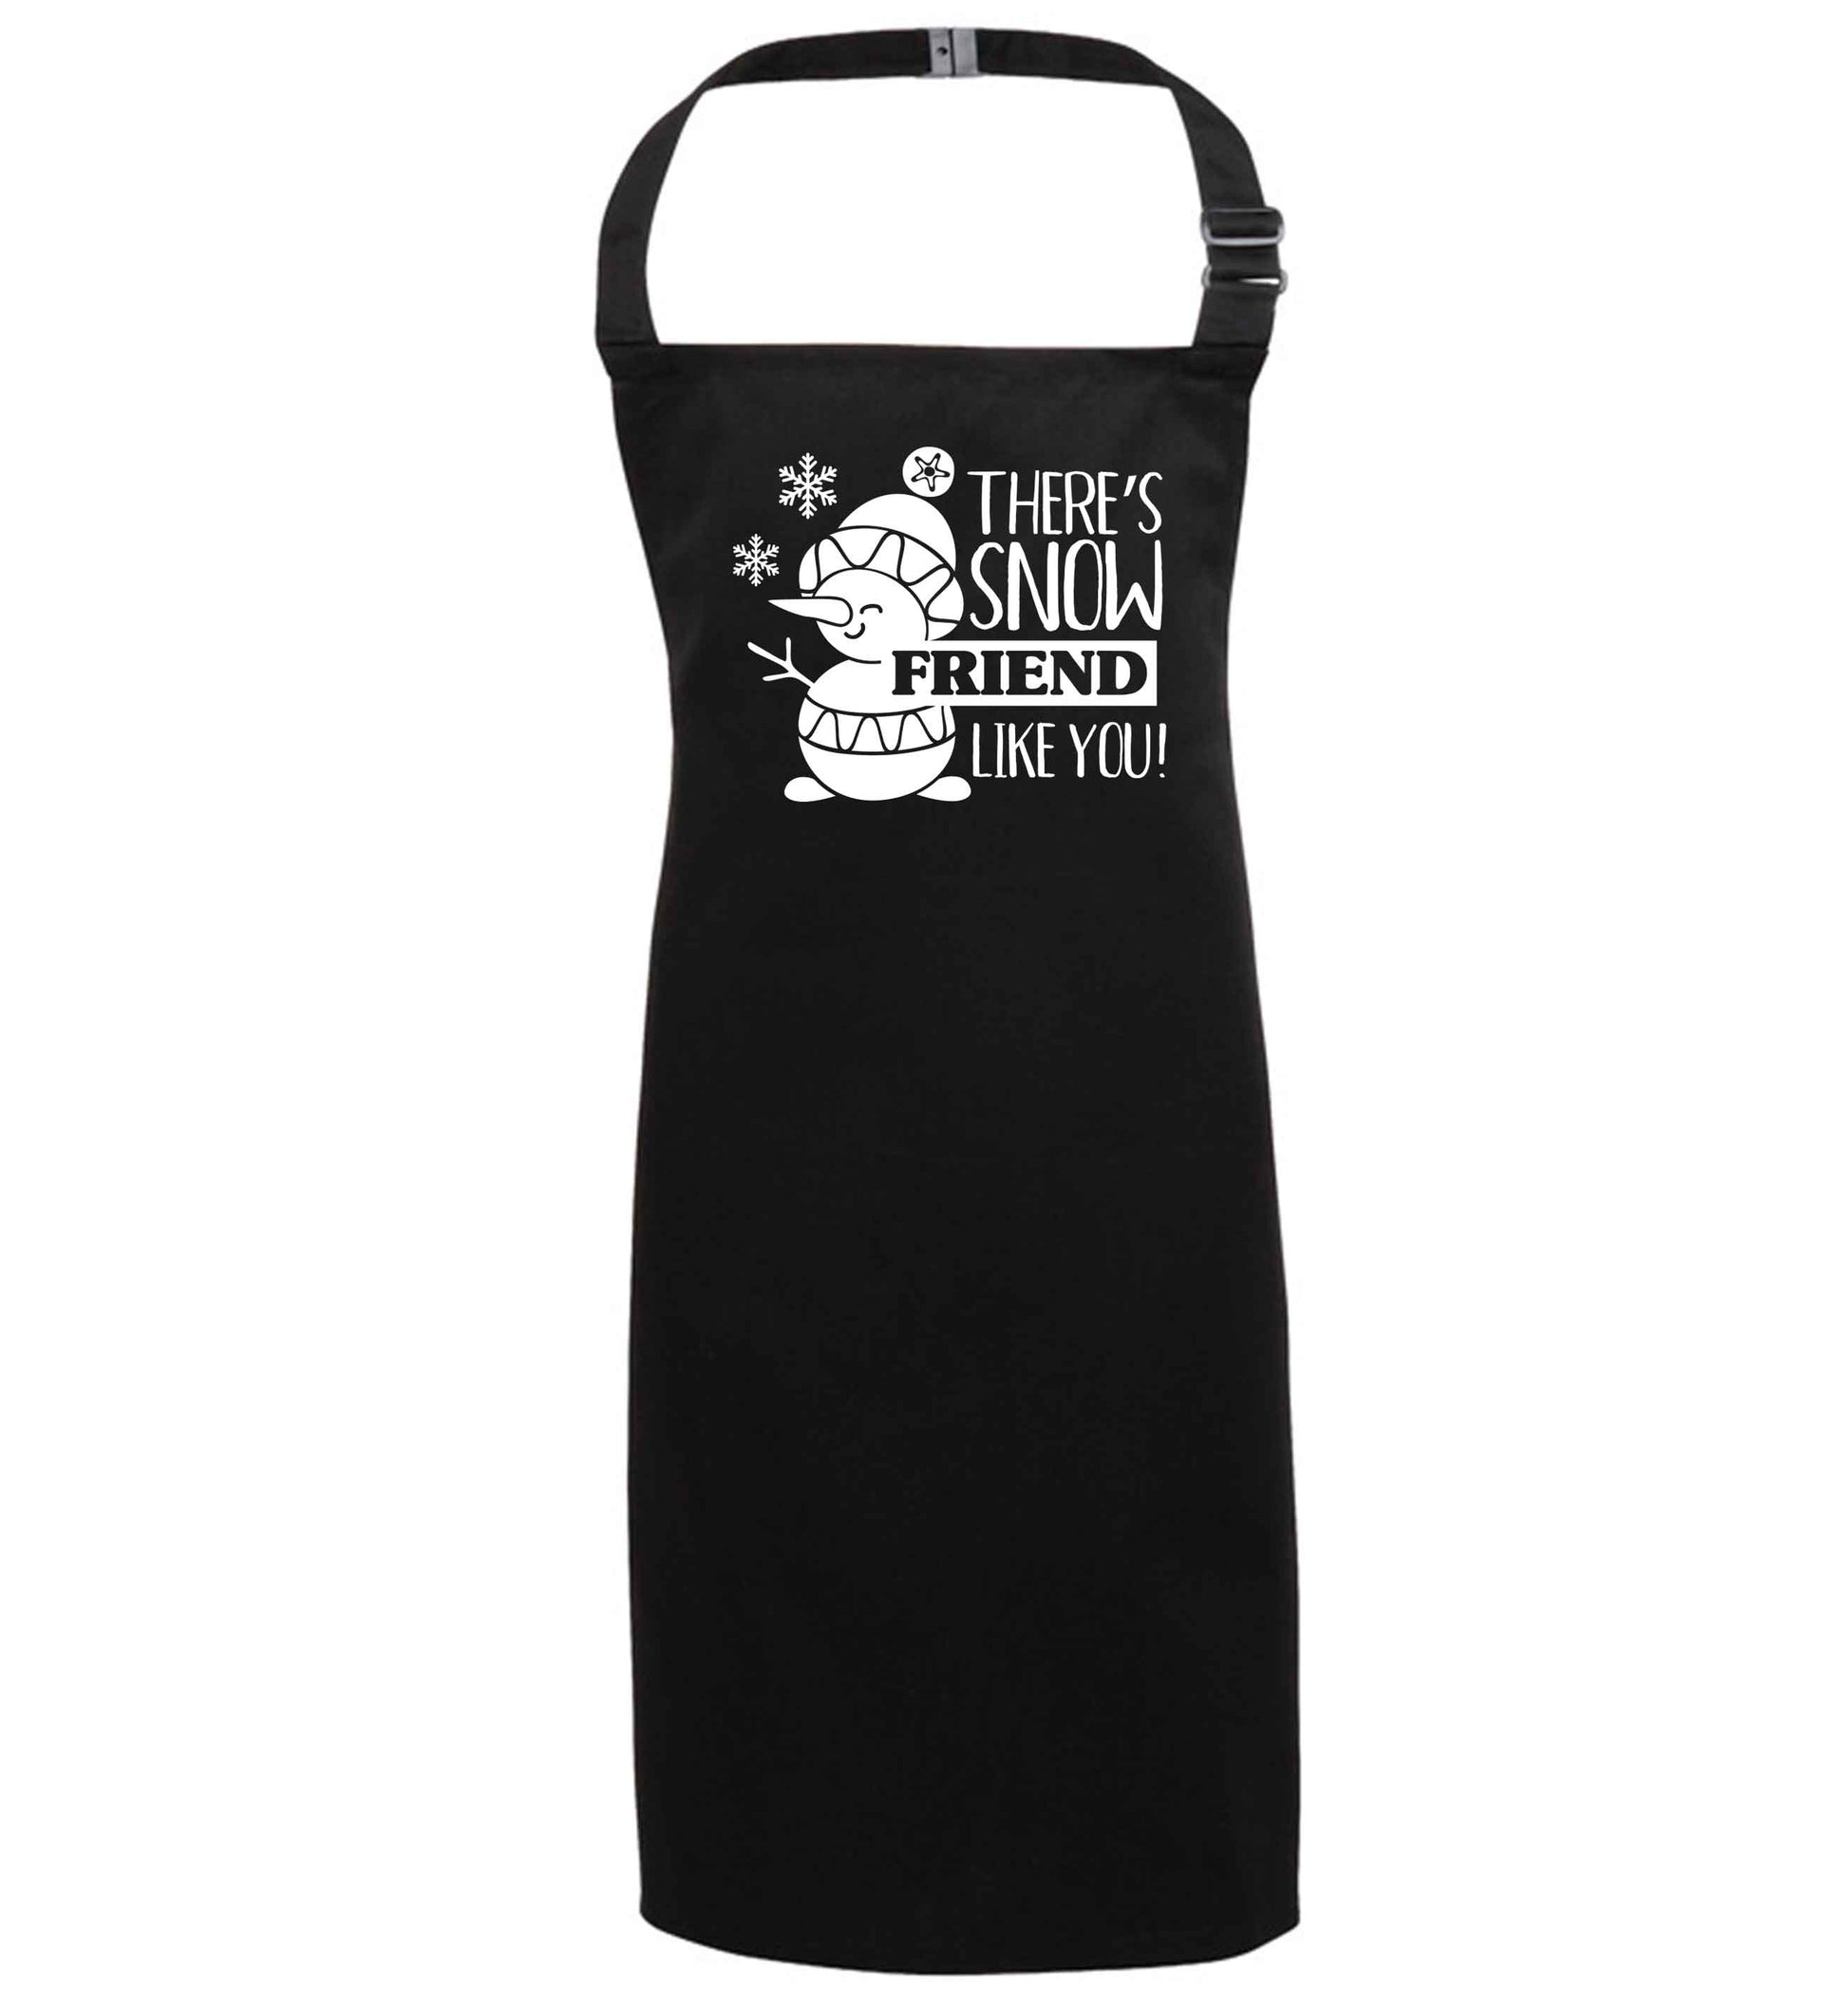 There's snow friend like you black apron 7-10 years